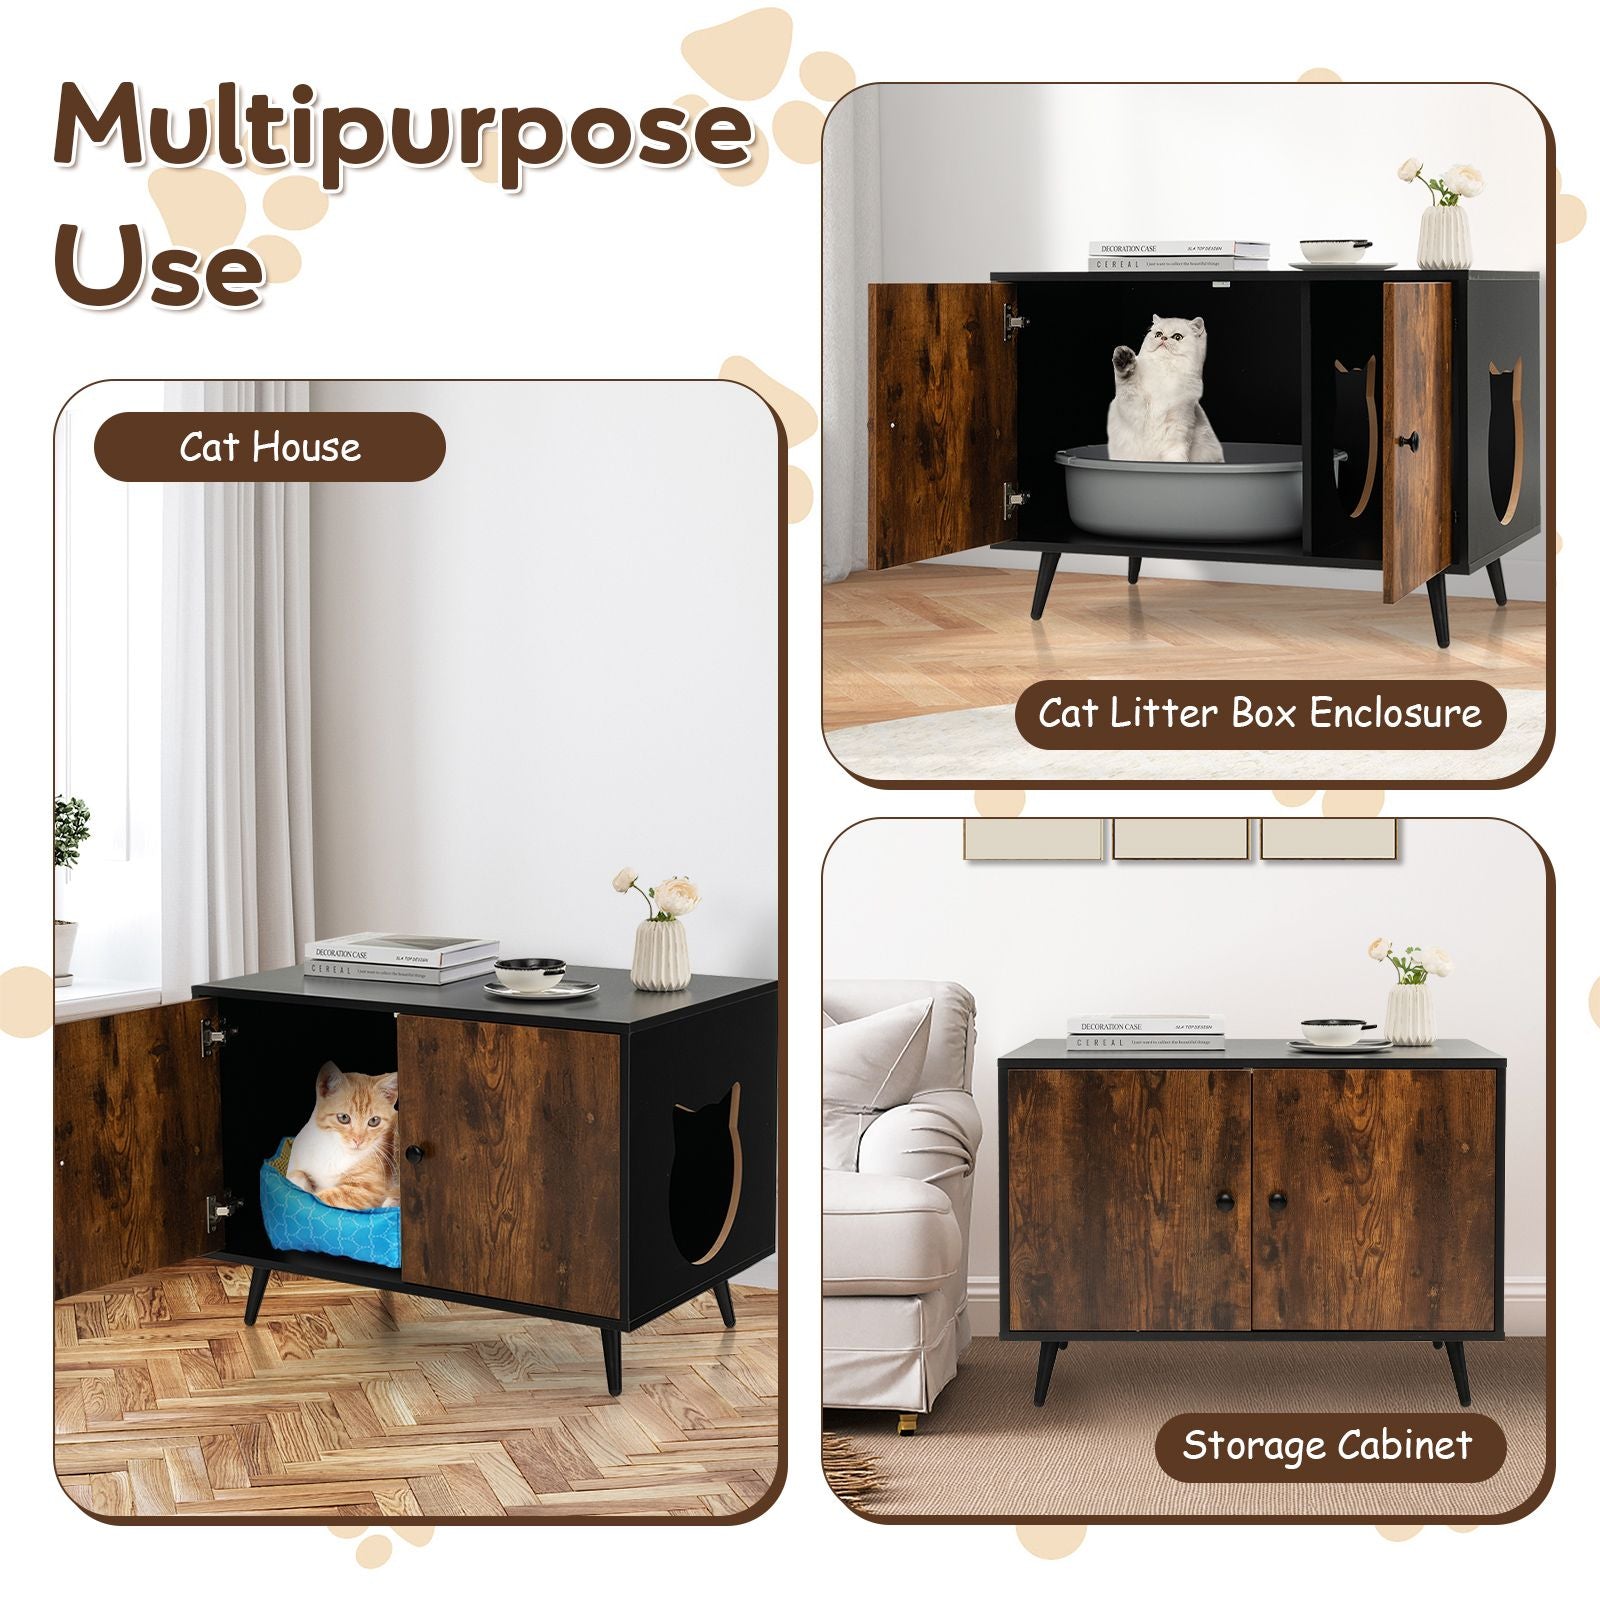 Modern Cat Litter Box Enclosure with Divider and 2 Cat Head-Shaped Entries